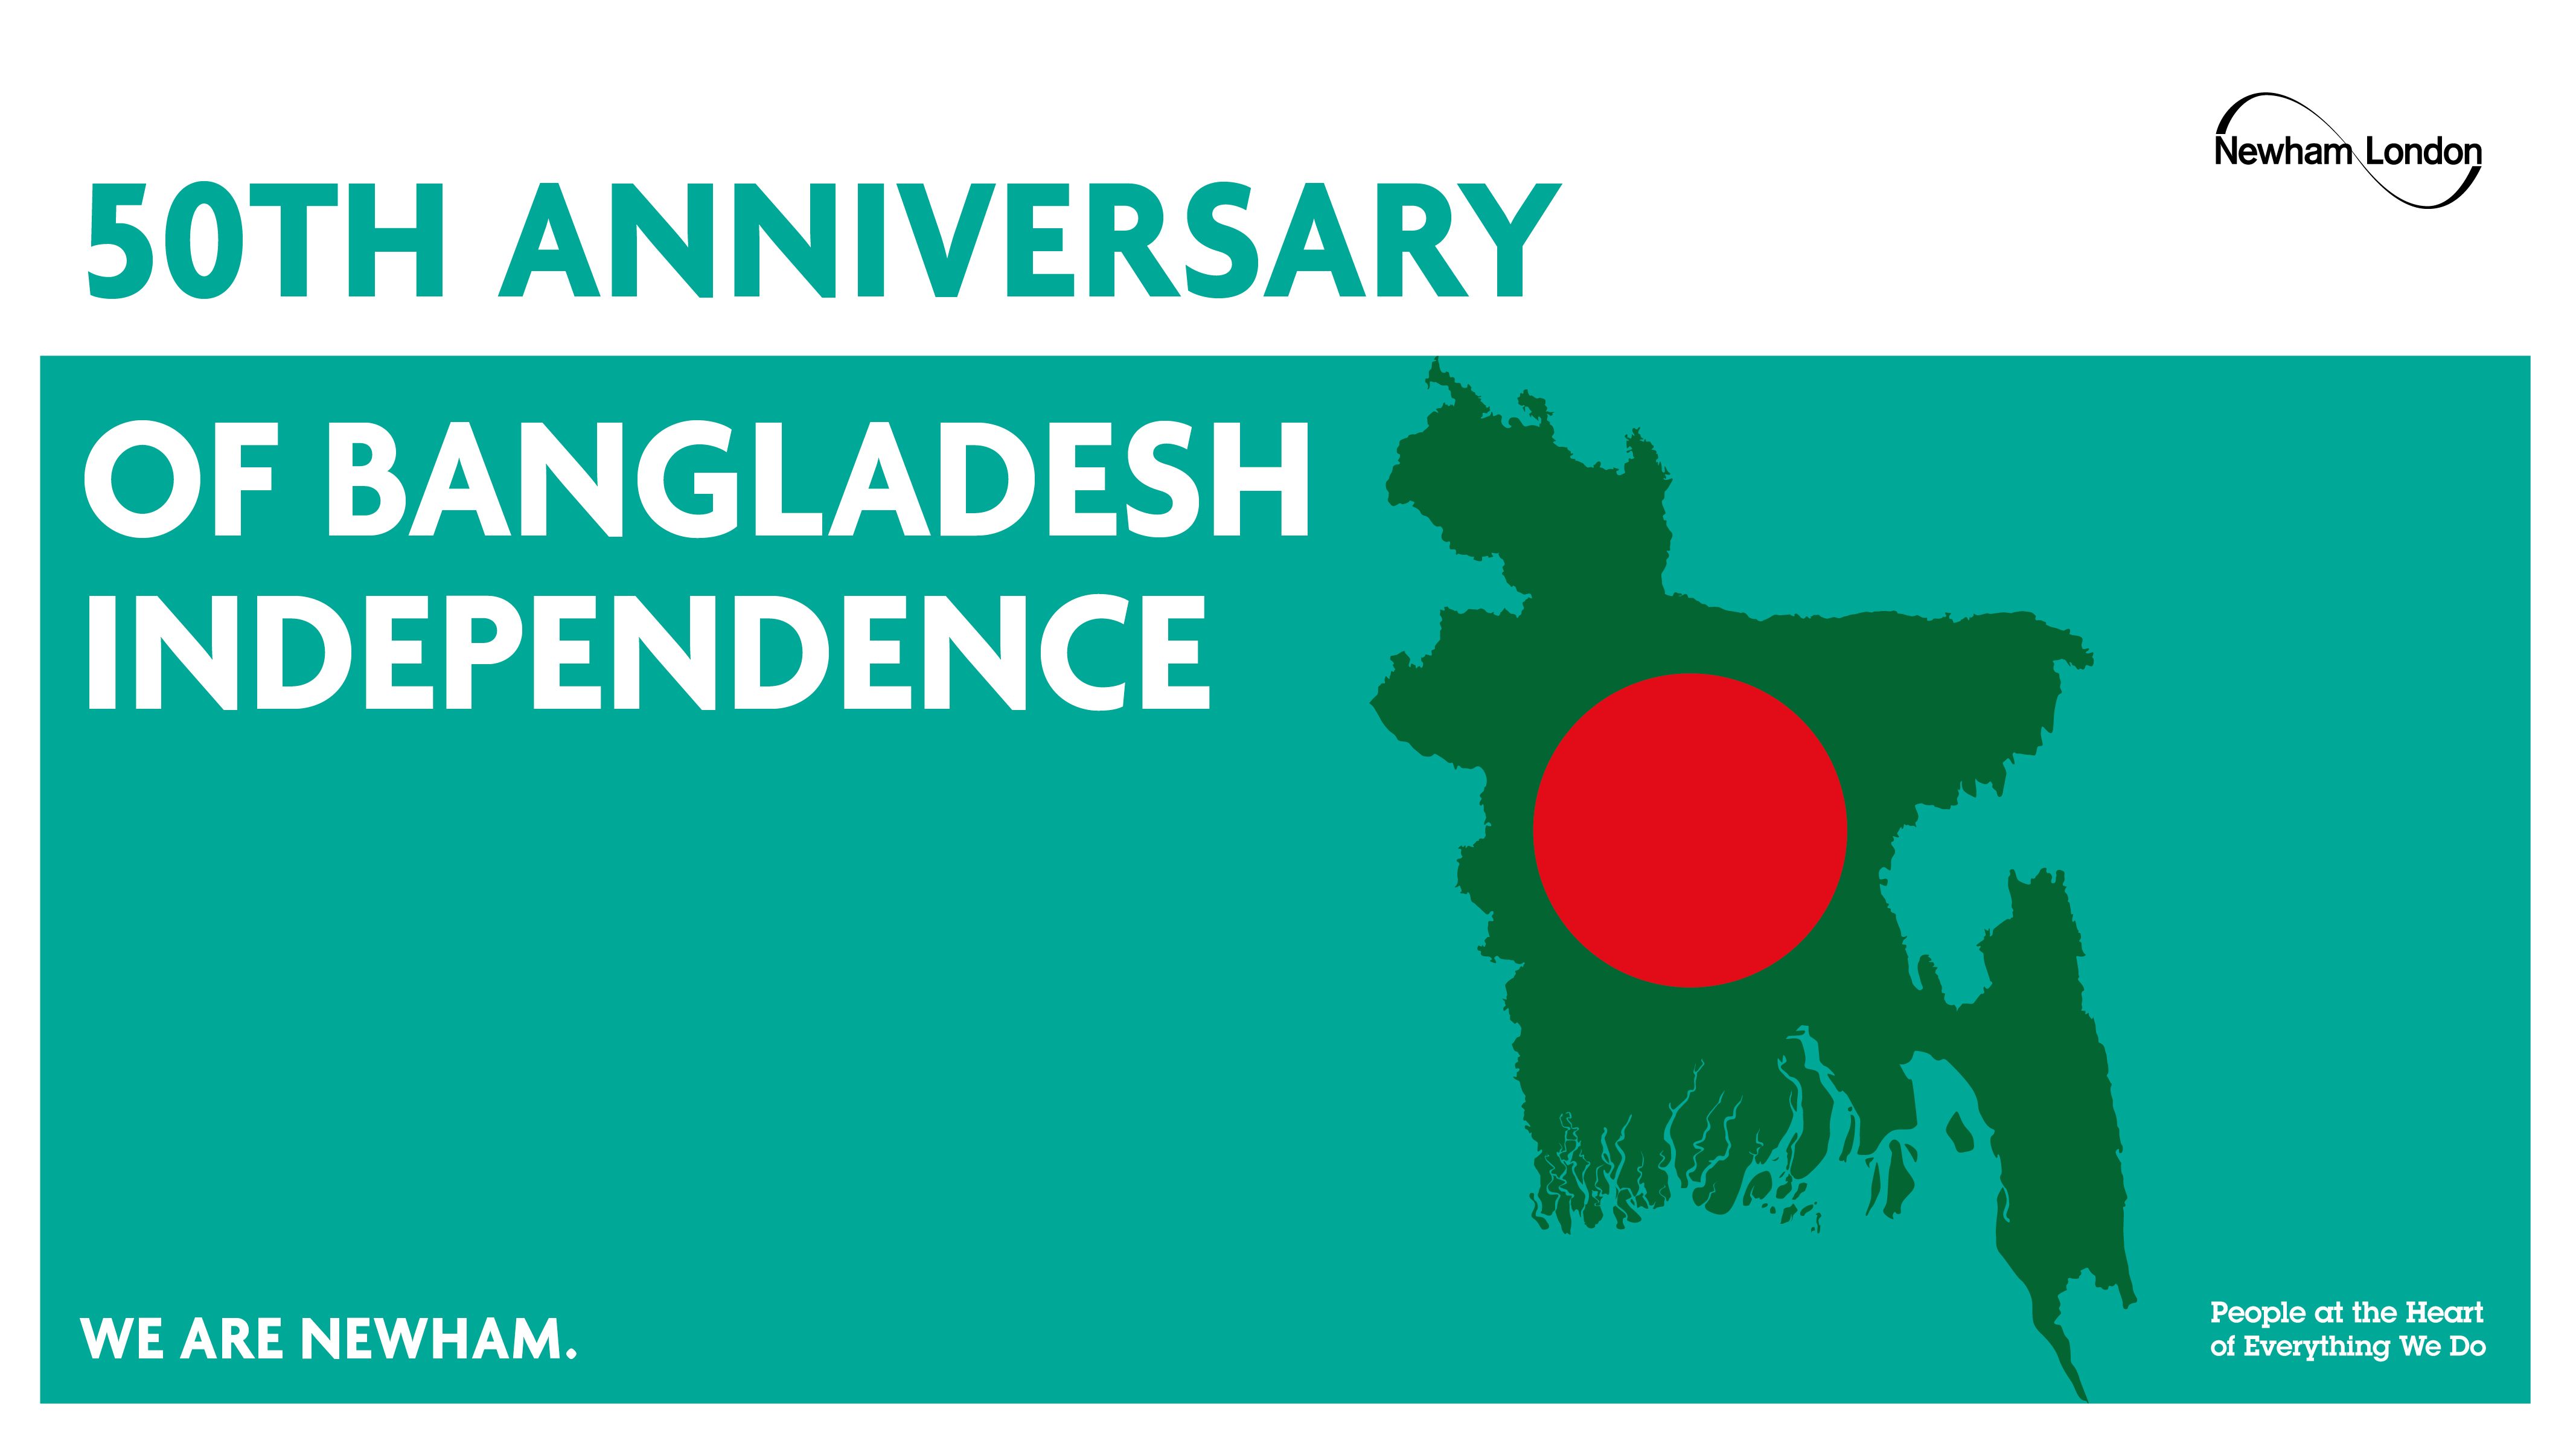 March 26, 2021. Musings on 50th Anniversary of Bangladesh Independence Day.